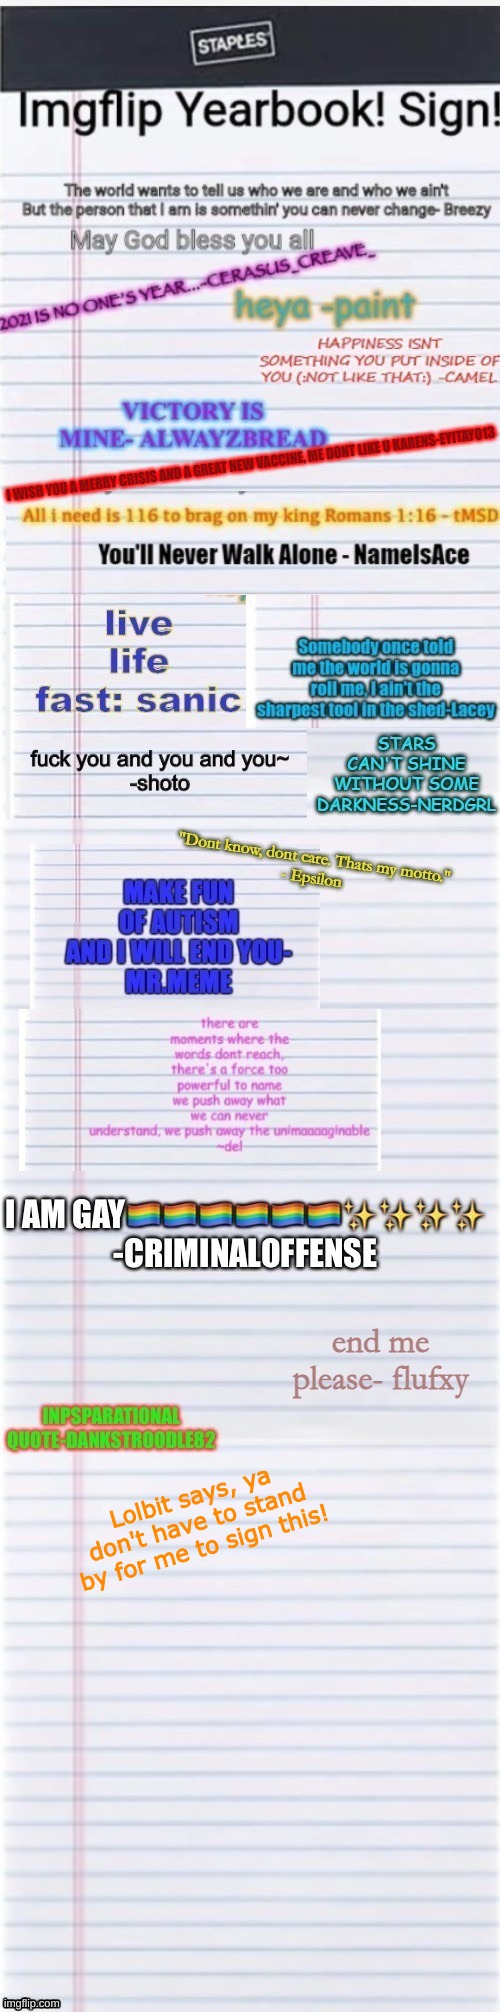 I hath signed the sacred yearbook uwu | Lolbit says, ya don't have to stand by for me to sign this! | image tagged in uwu | made w/ Imgflip meme maker